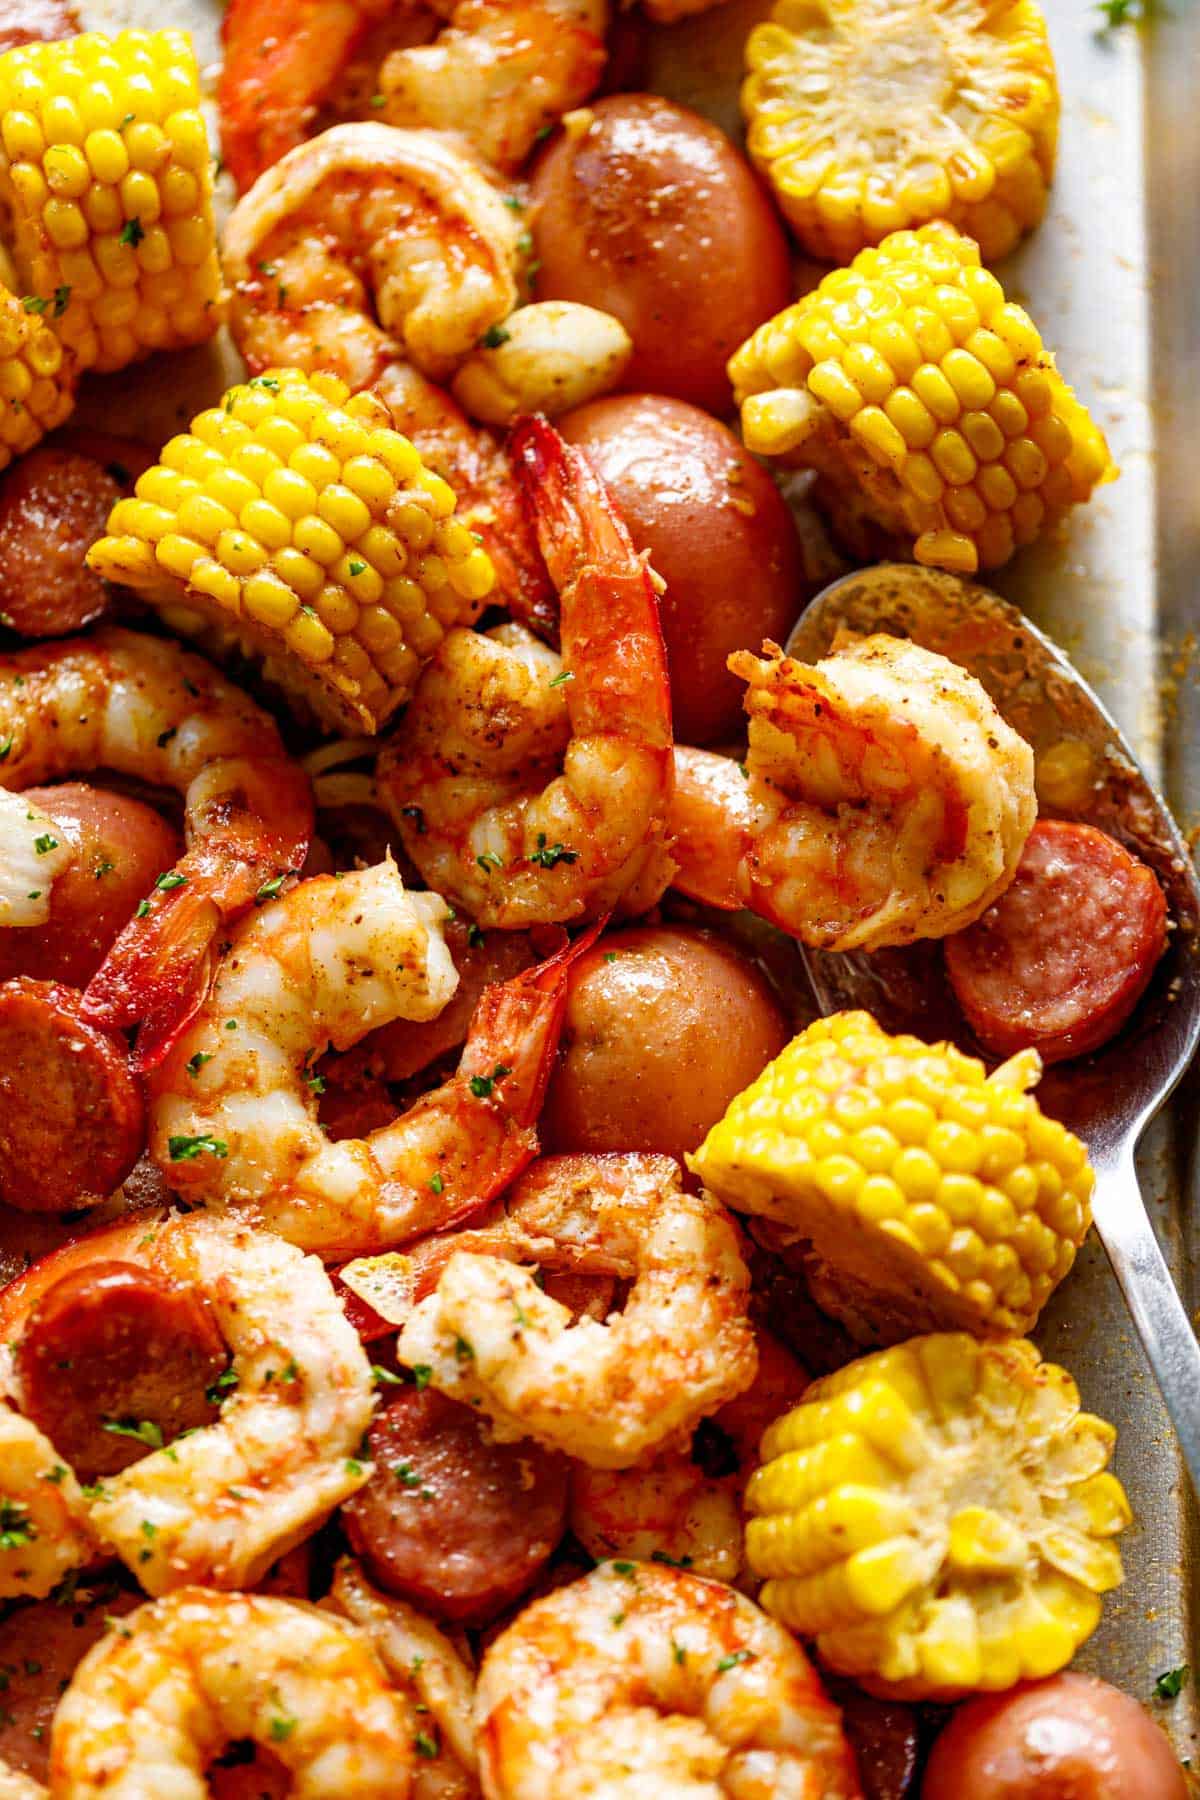 Shrimp Boil smothered in garlic butter and Old Bay seasoning made easy in the oven. Ready in 30 minutes! | cafedelites.com